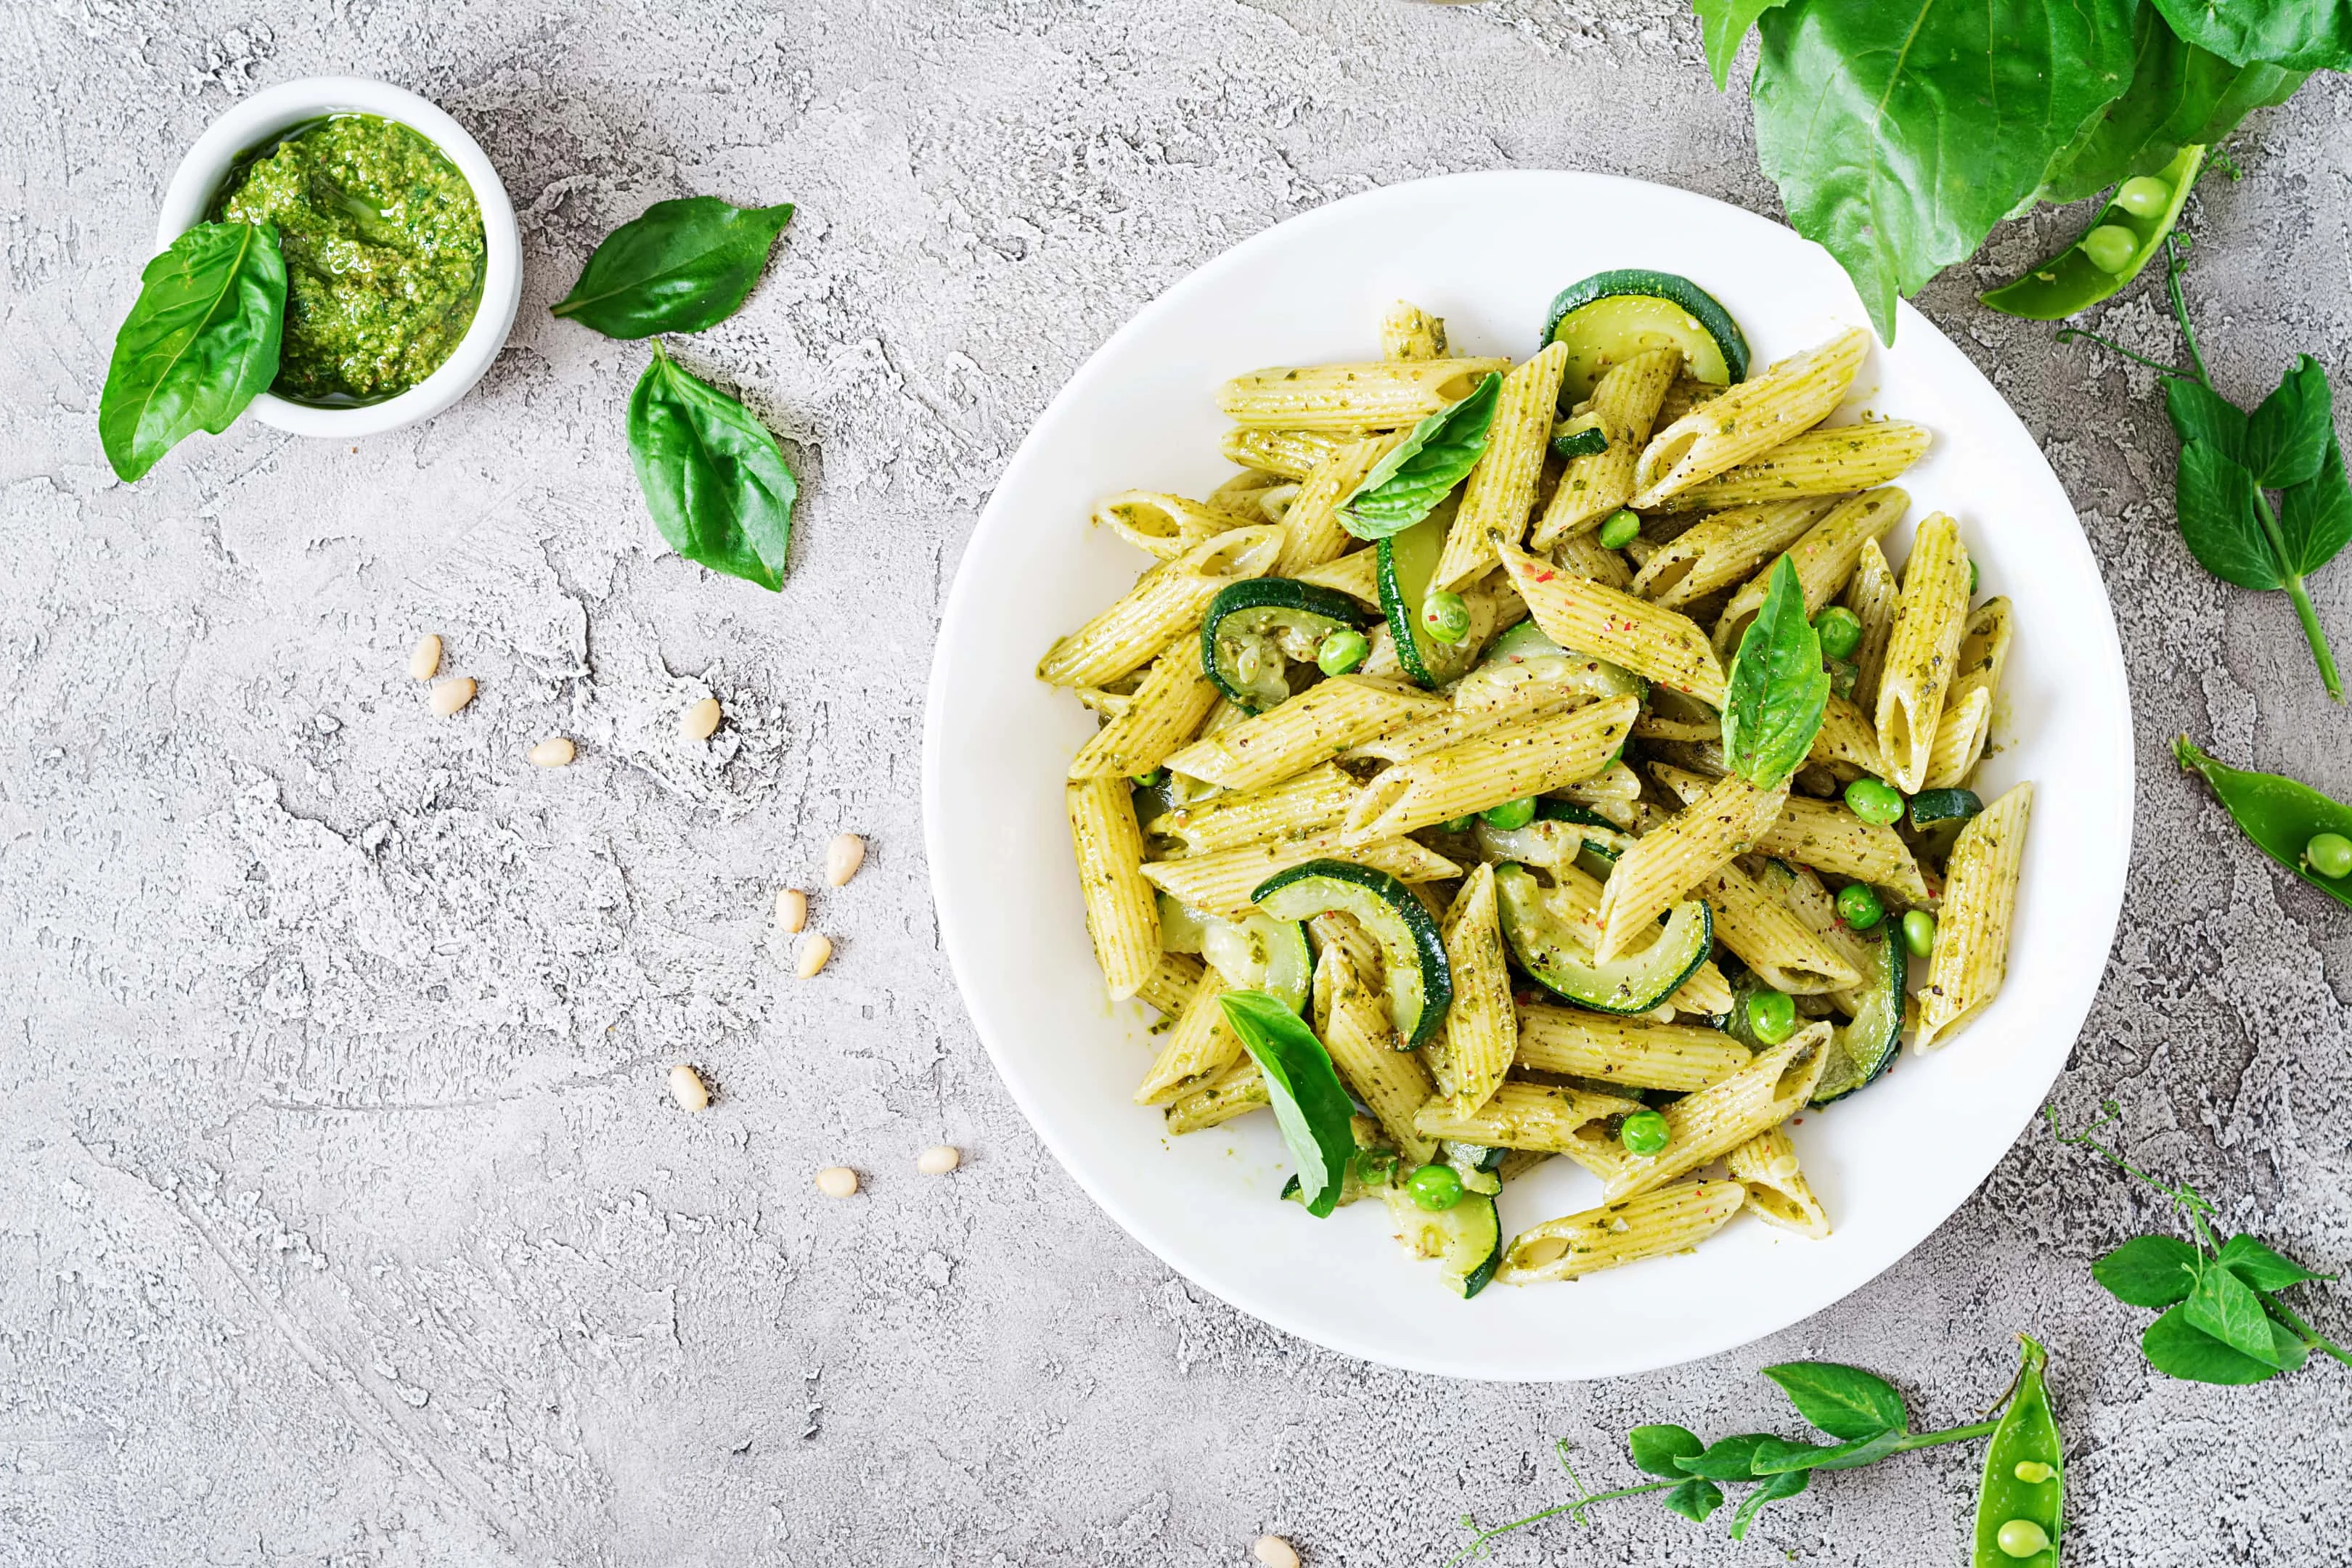 Penne pasta with pesto sauce, zucchini, green peas and basil